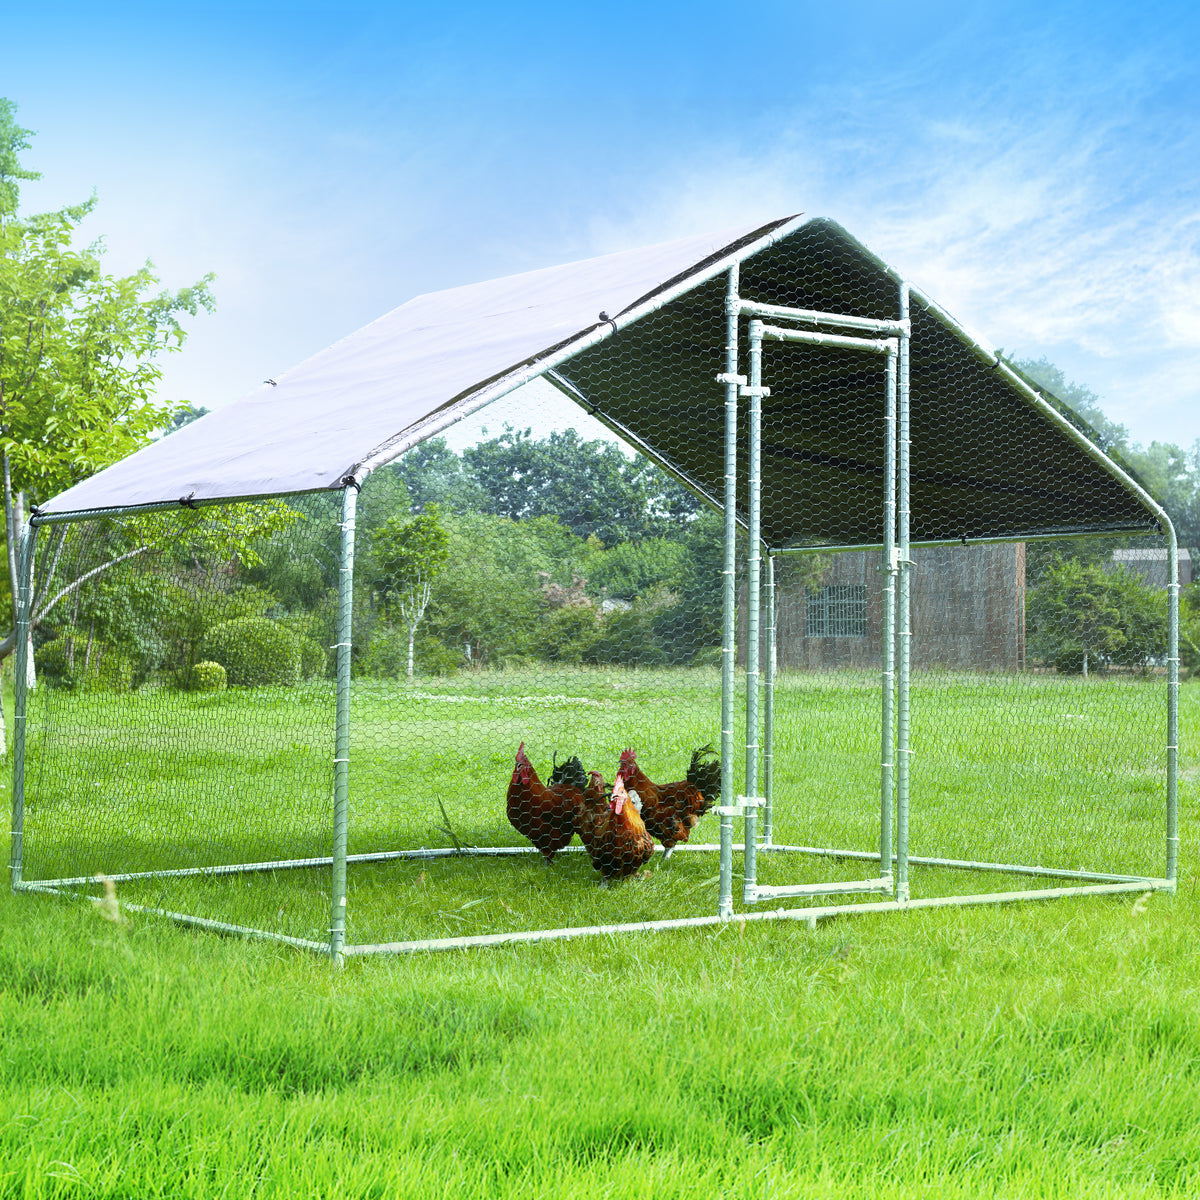 HITTITE Large Metal Chicken Coop Run for 6/8/10 Chickens,Heavy Duty Walk-in Poultry Cage with Cover,Outdoor Hen Rabbit Chicken Run in with Spire Shaped for &amp;Farm Yard（6.4&#39;Lx9.84&#39;Wx6.56&#39;H）